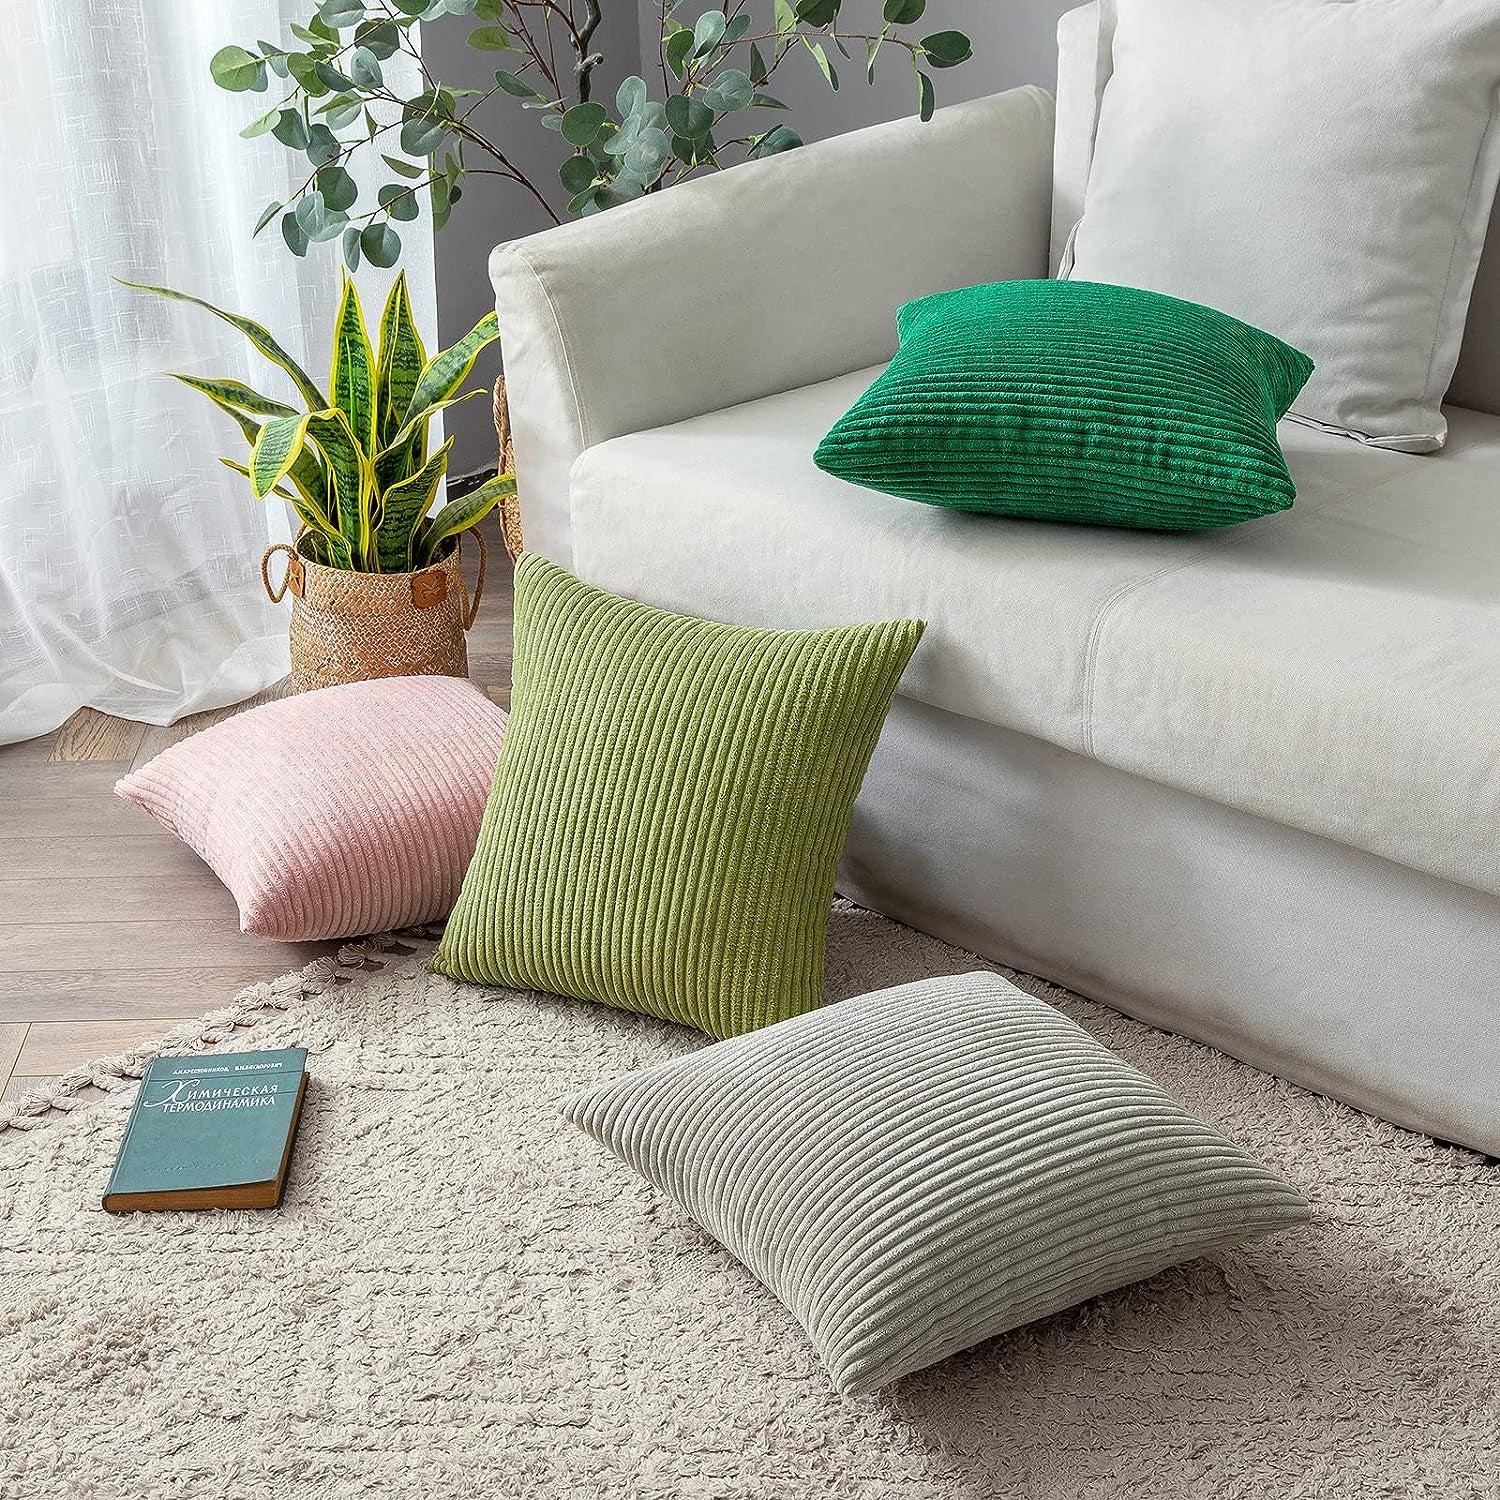 41 Home Products For A Cozy Aesthetic